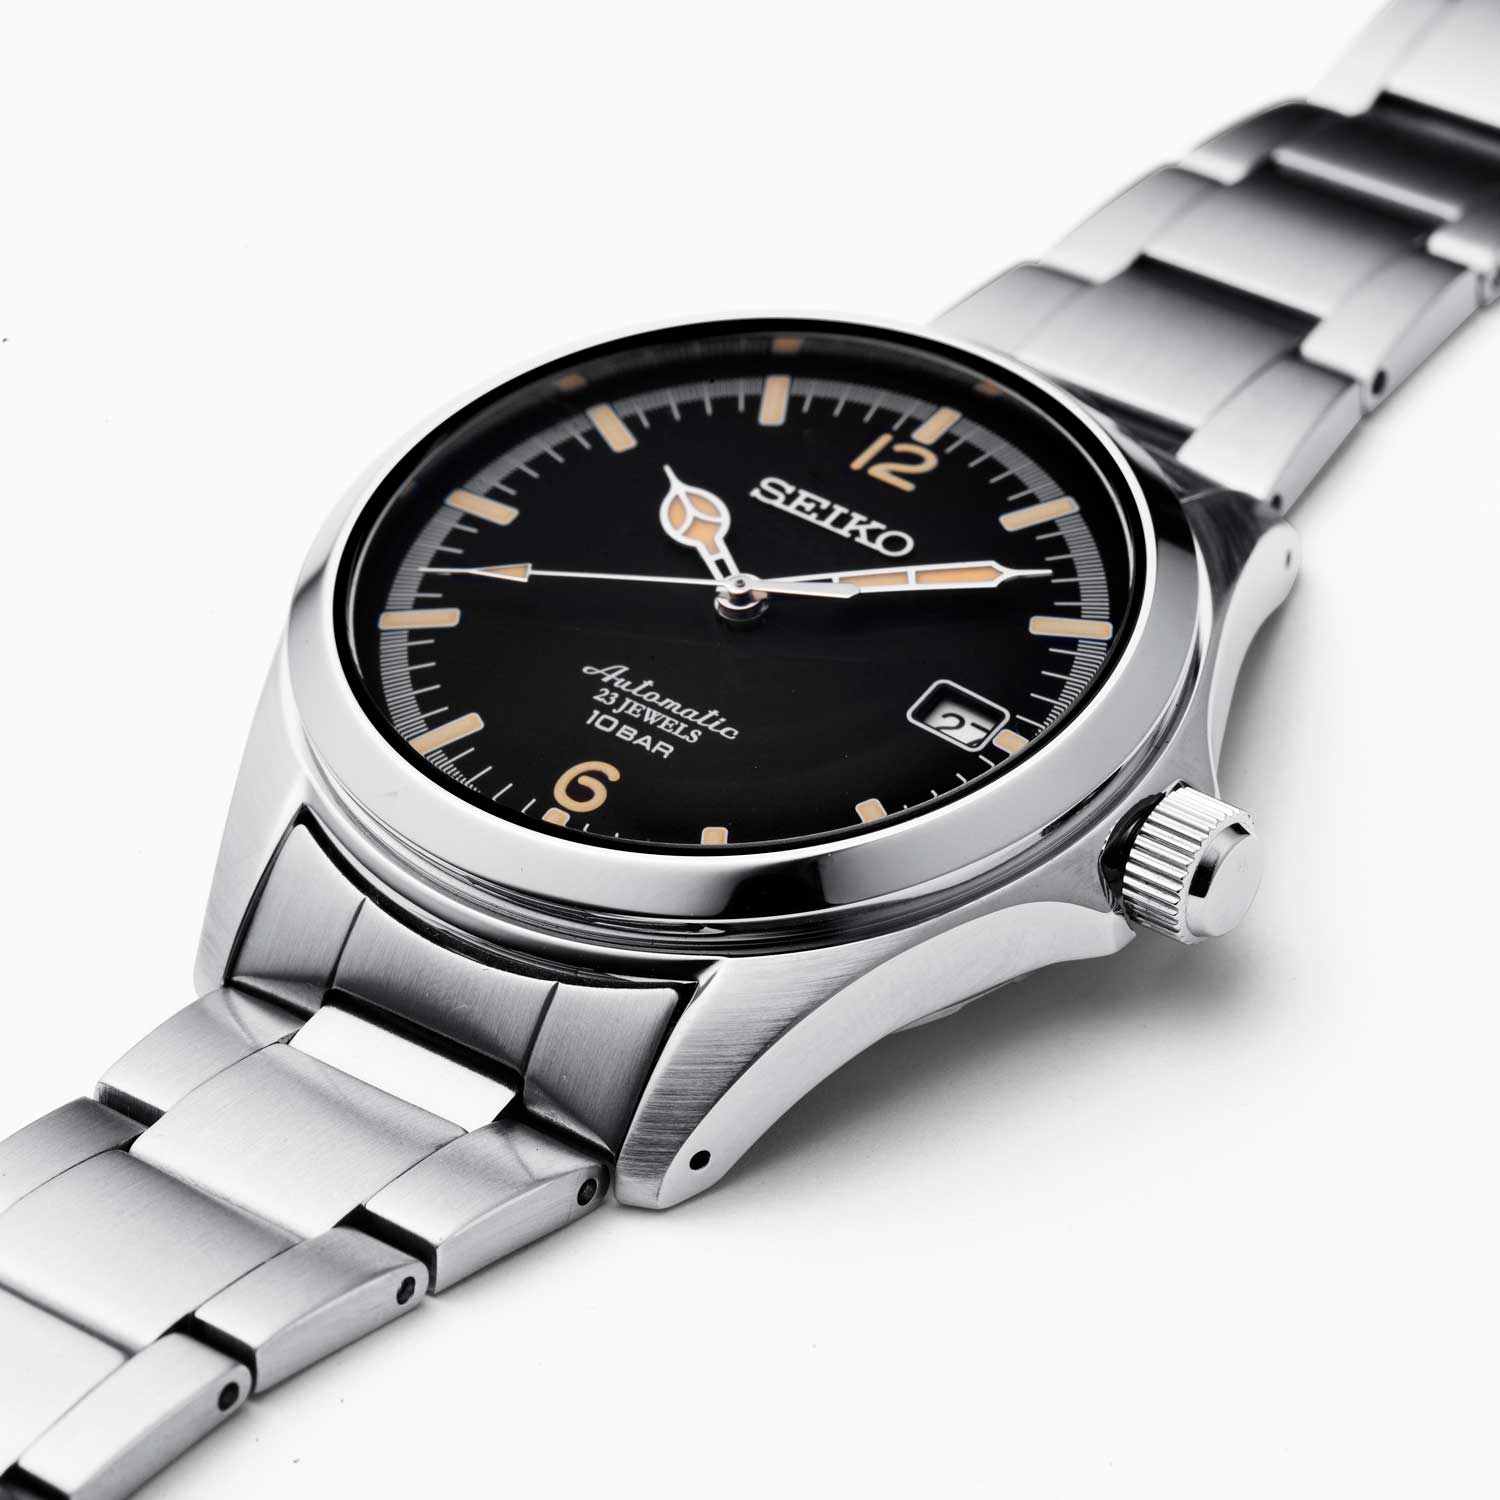 The Seiko x TiCTAC special edition New Classics is developed for the retailer's 35th anniversary. It's only available in Japan both online and offline